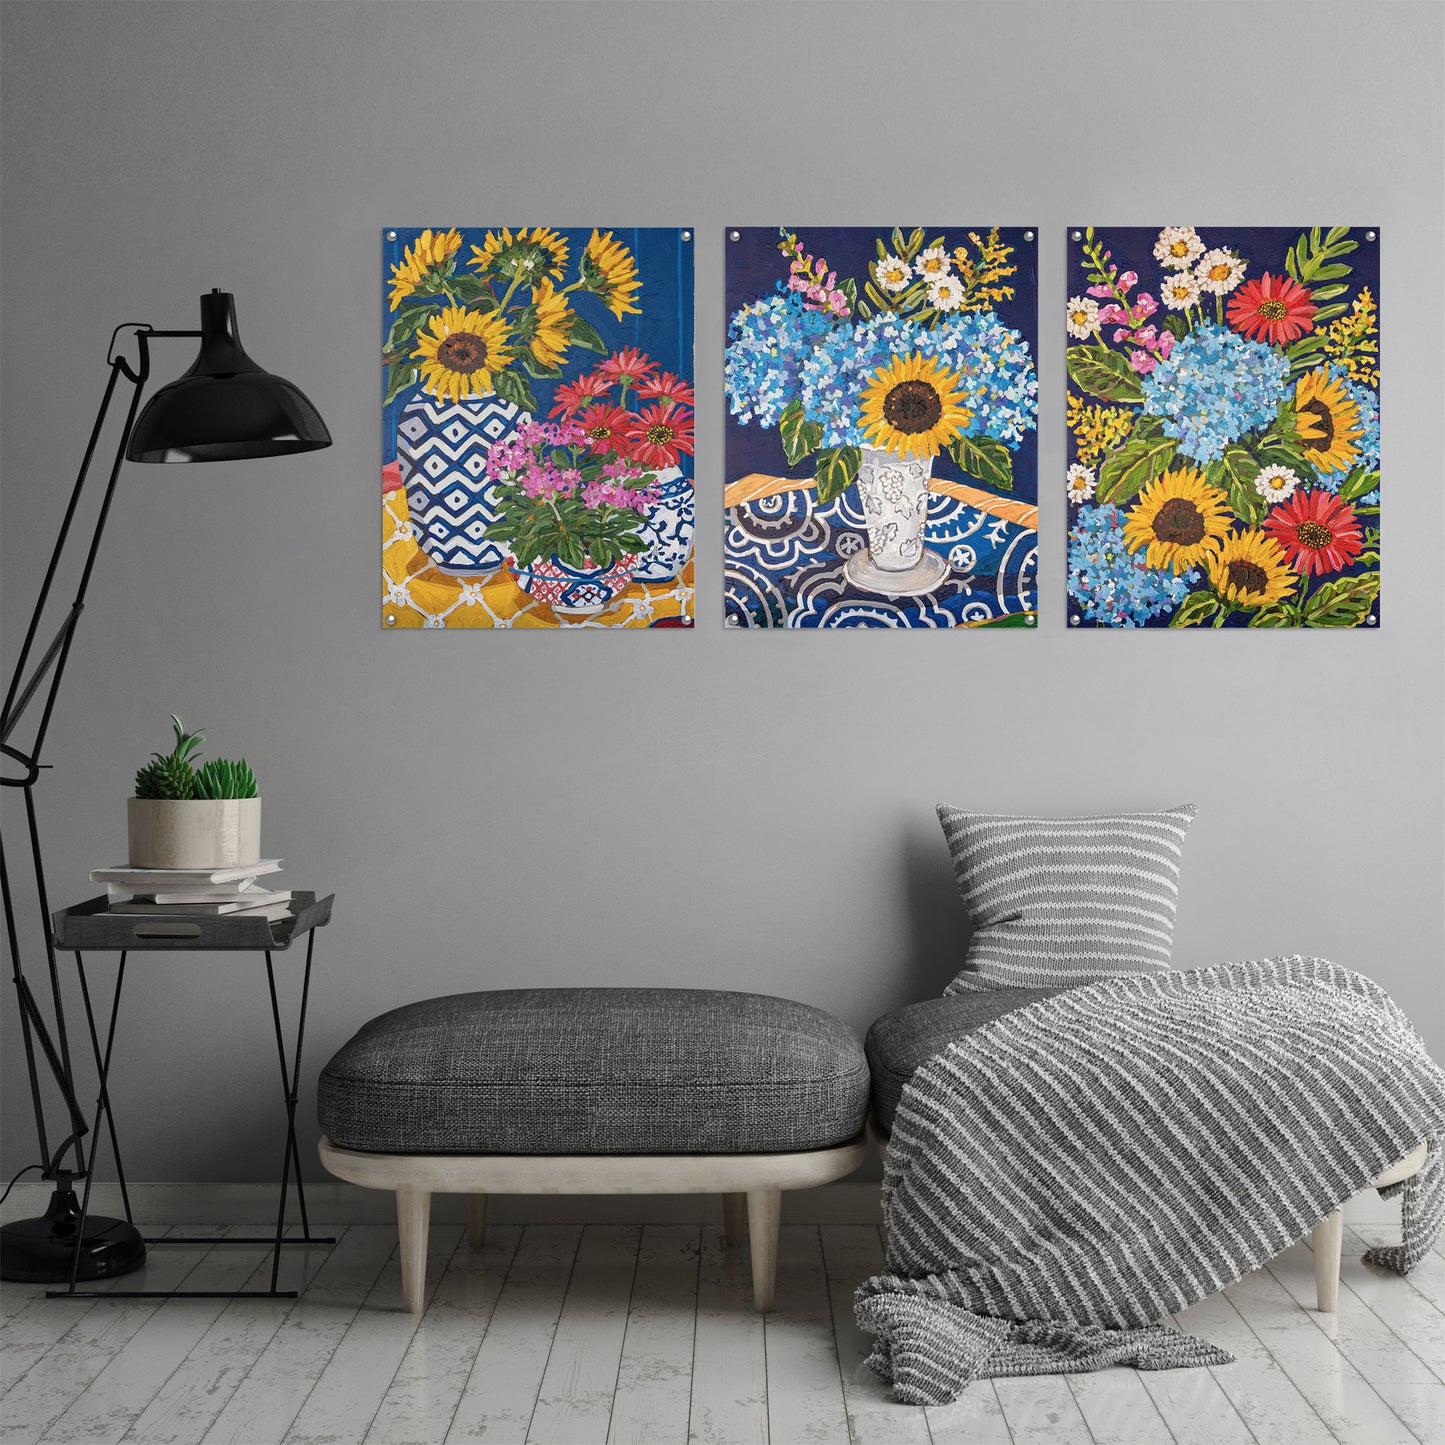 (Set of 3) Triptych Wall Art Colorful Sunflowers by Mandy Buchanan - Poster Print